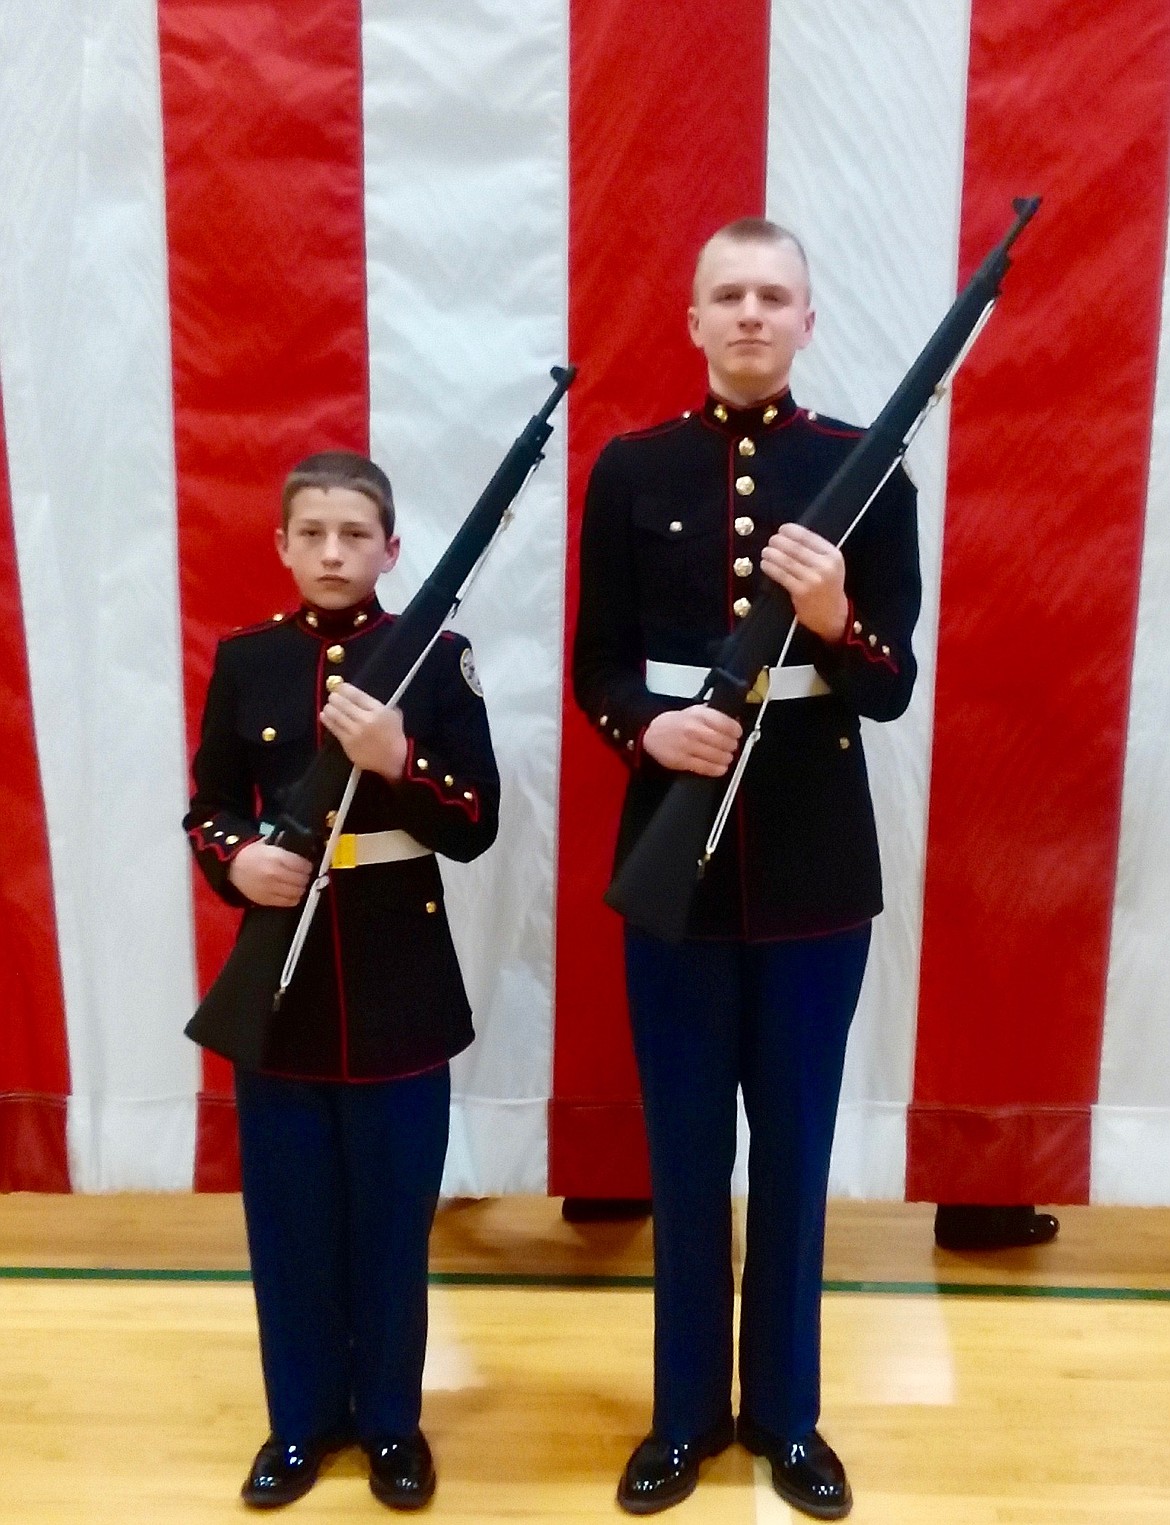 Junior cadets Ethan Tomczyk and Taylor Domonoske, who won second and third place respectively in an individual rifle drill competiton.